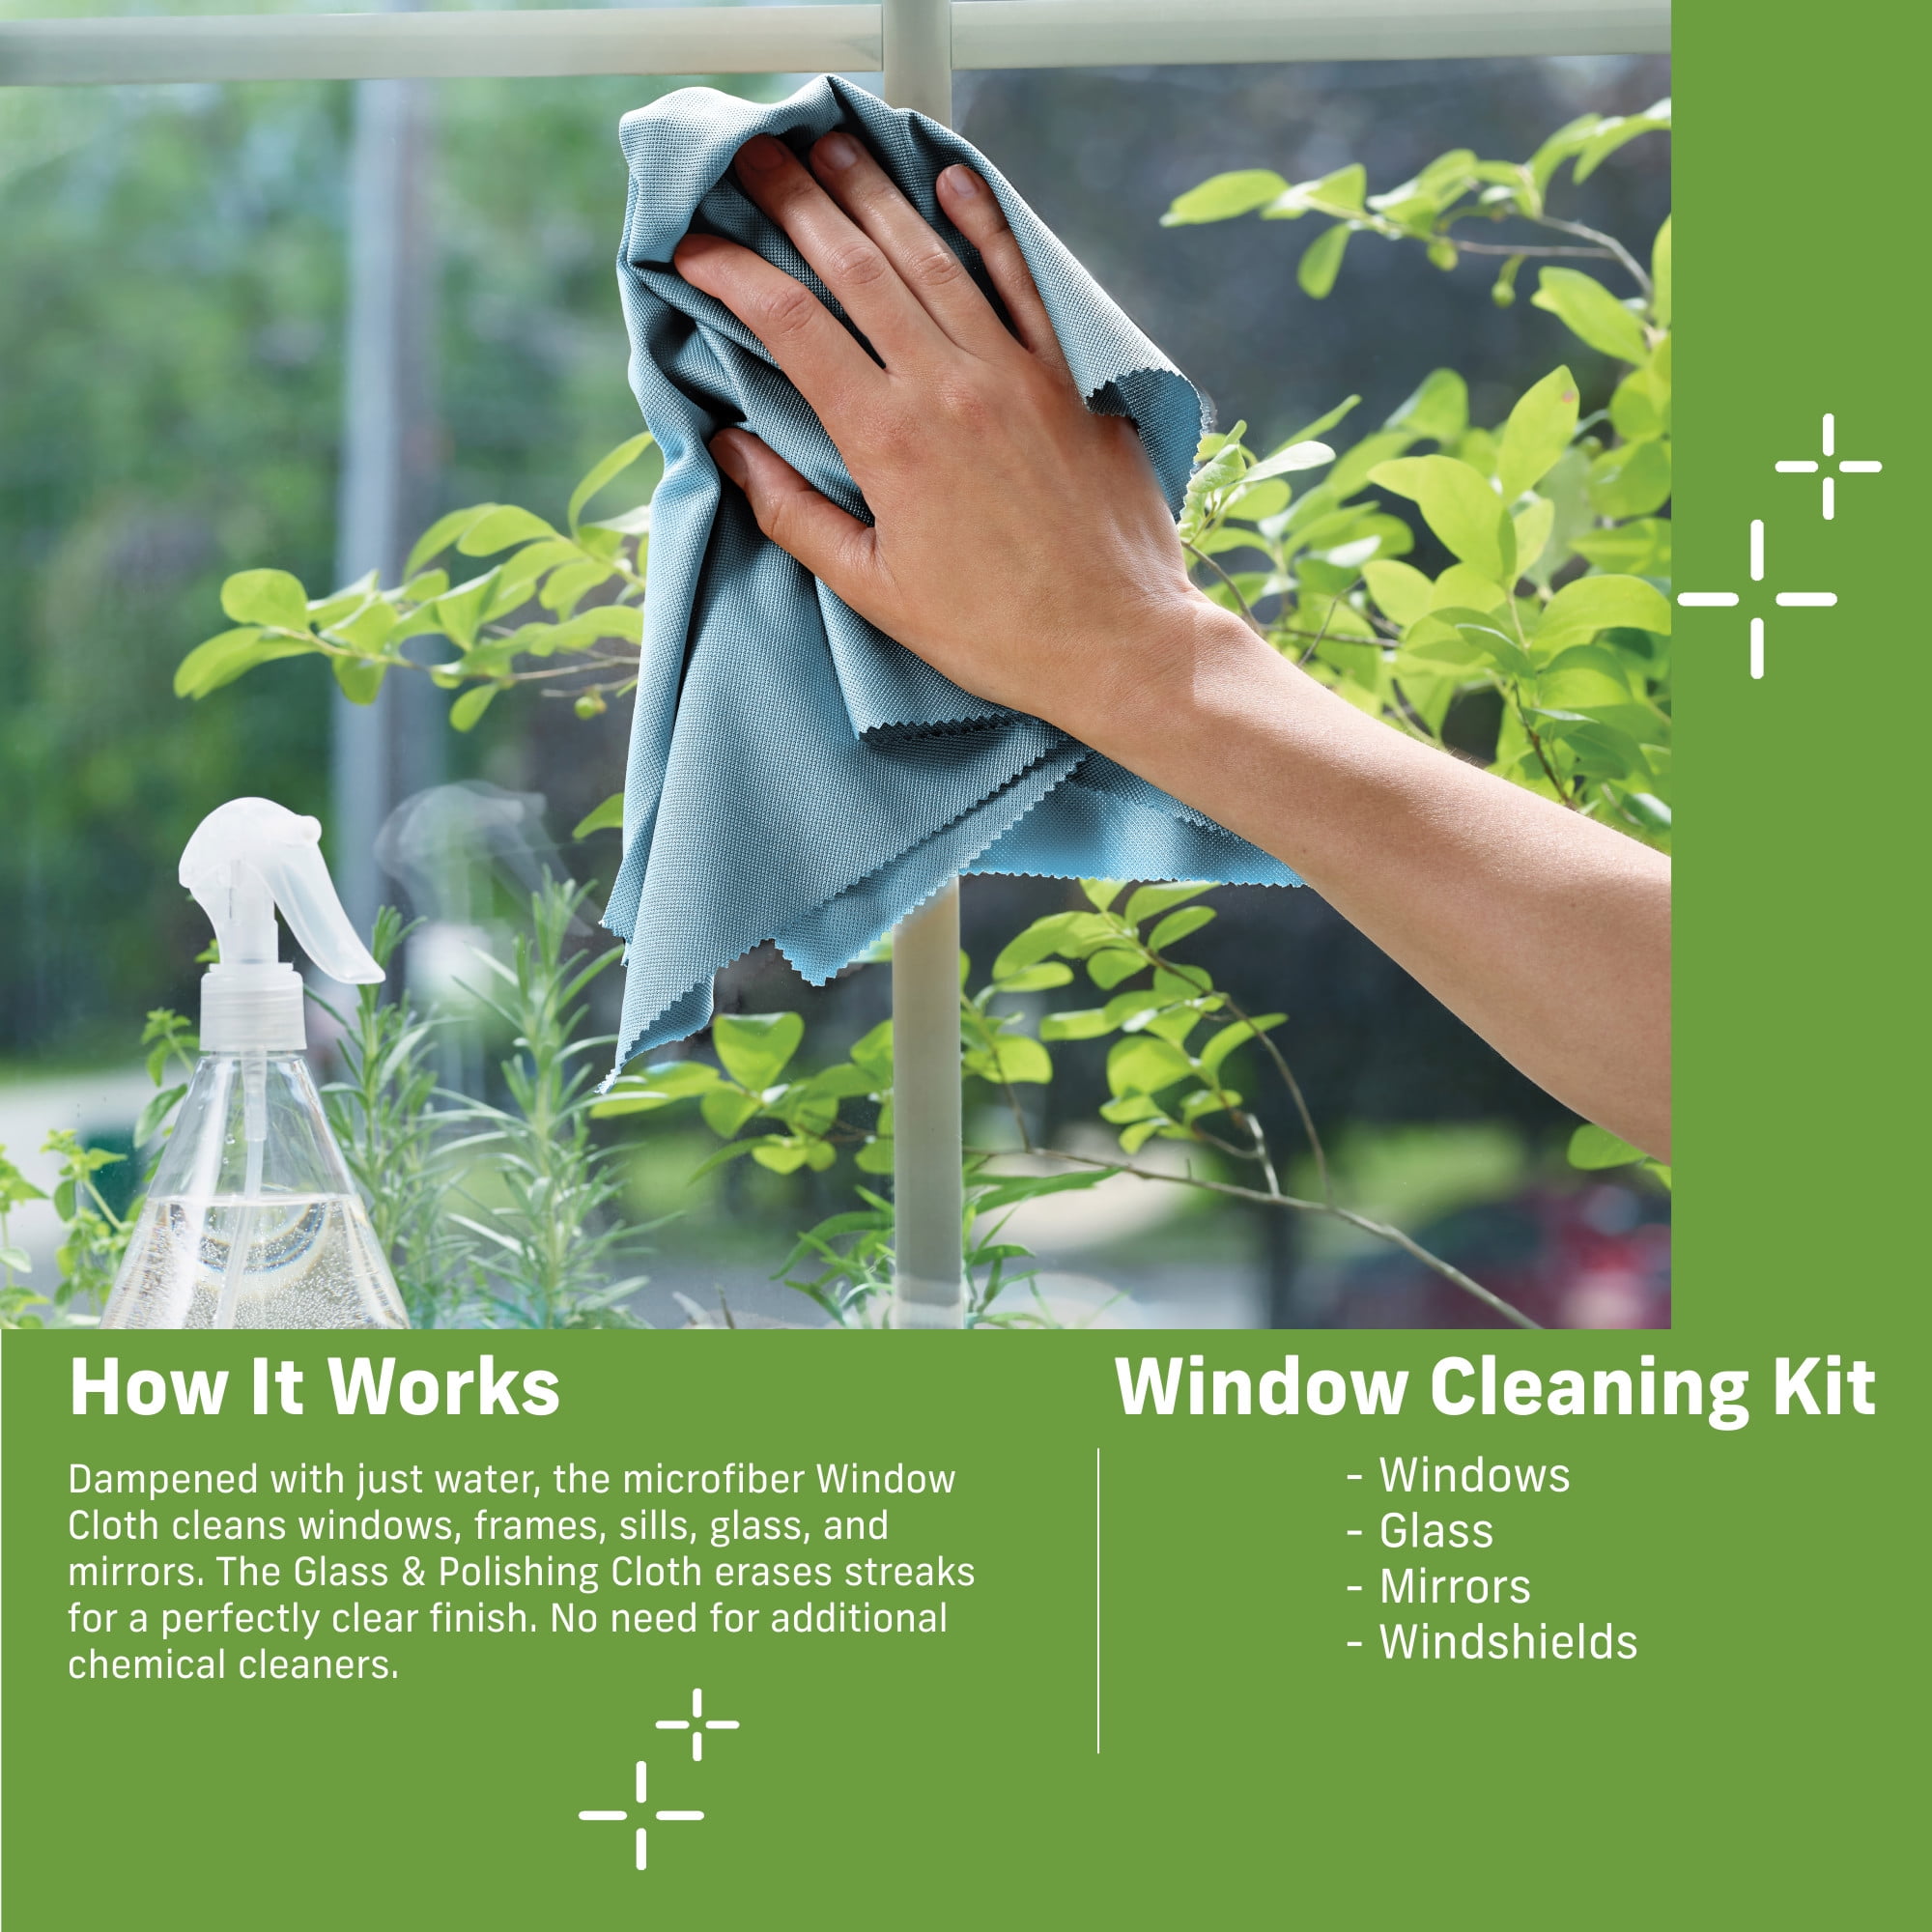 Green Cleaning Mirrors, Windows & Screens